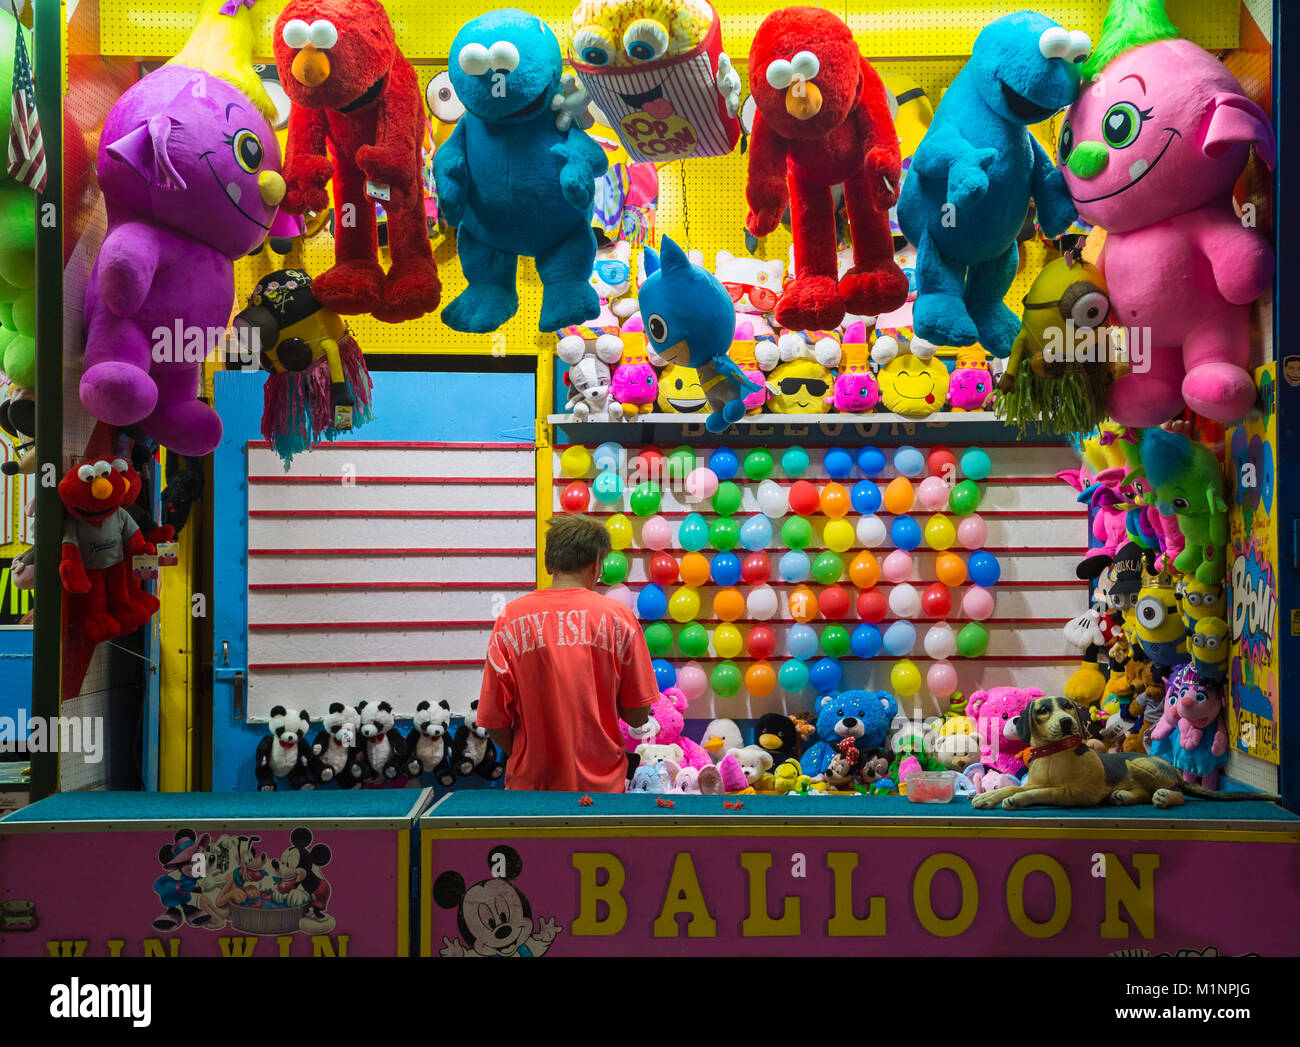 NEW YORK CITY - AUGUST 15, 2017: A worker stands in a balloon-popping booth at the Coney Island boardwalk amusement park. Stock Photo